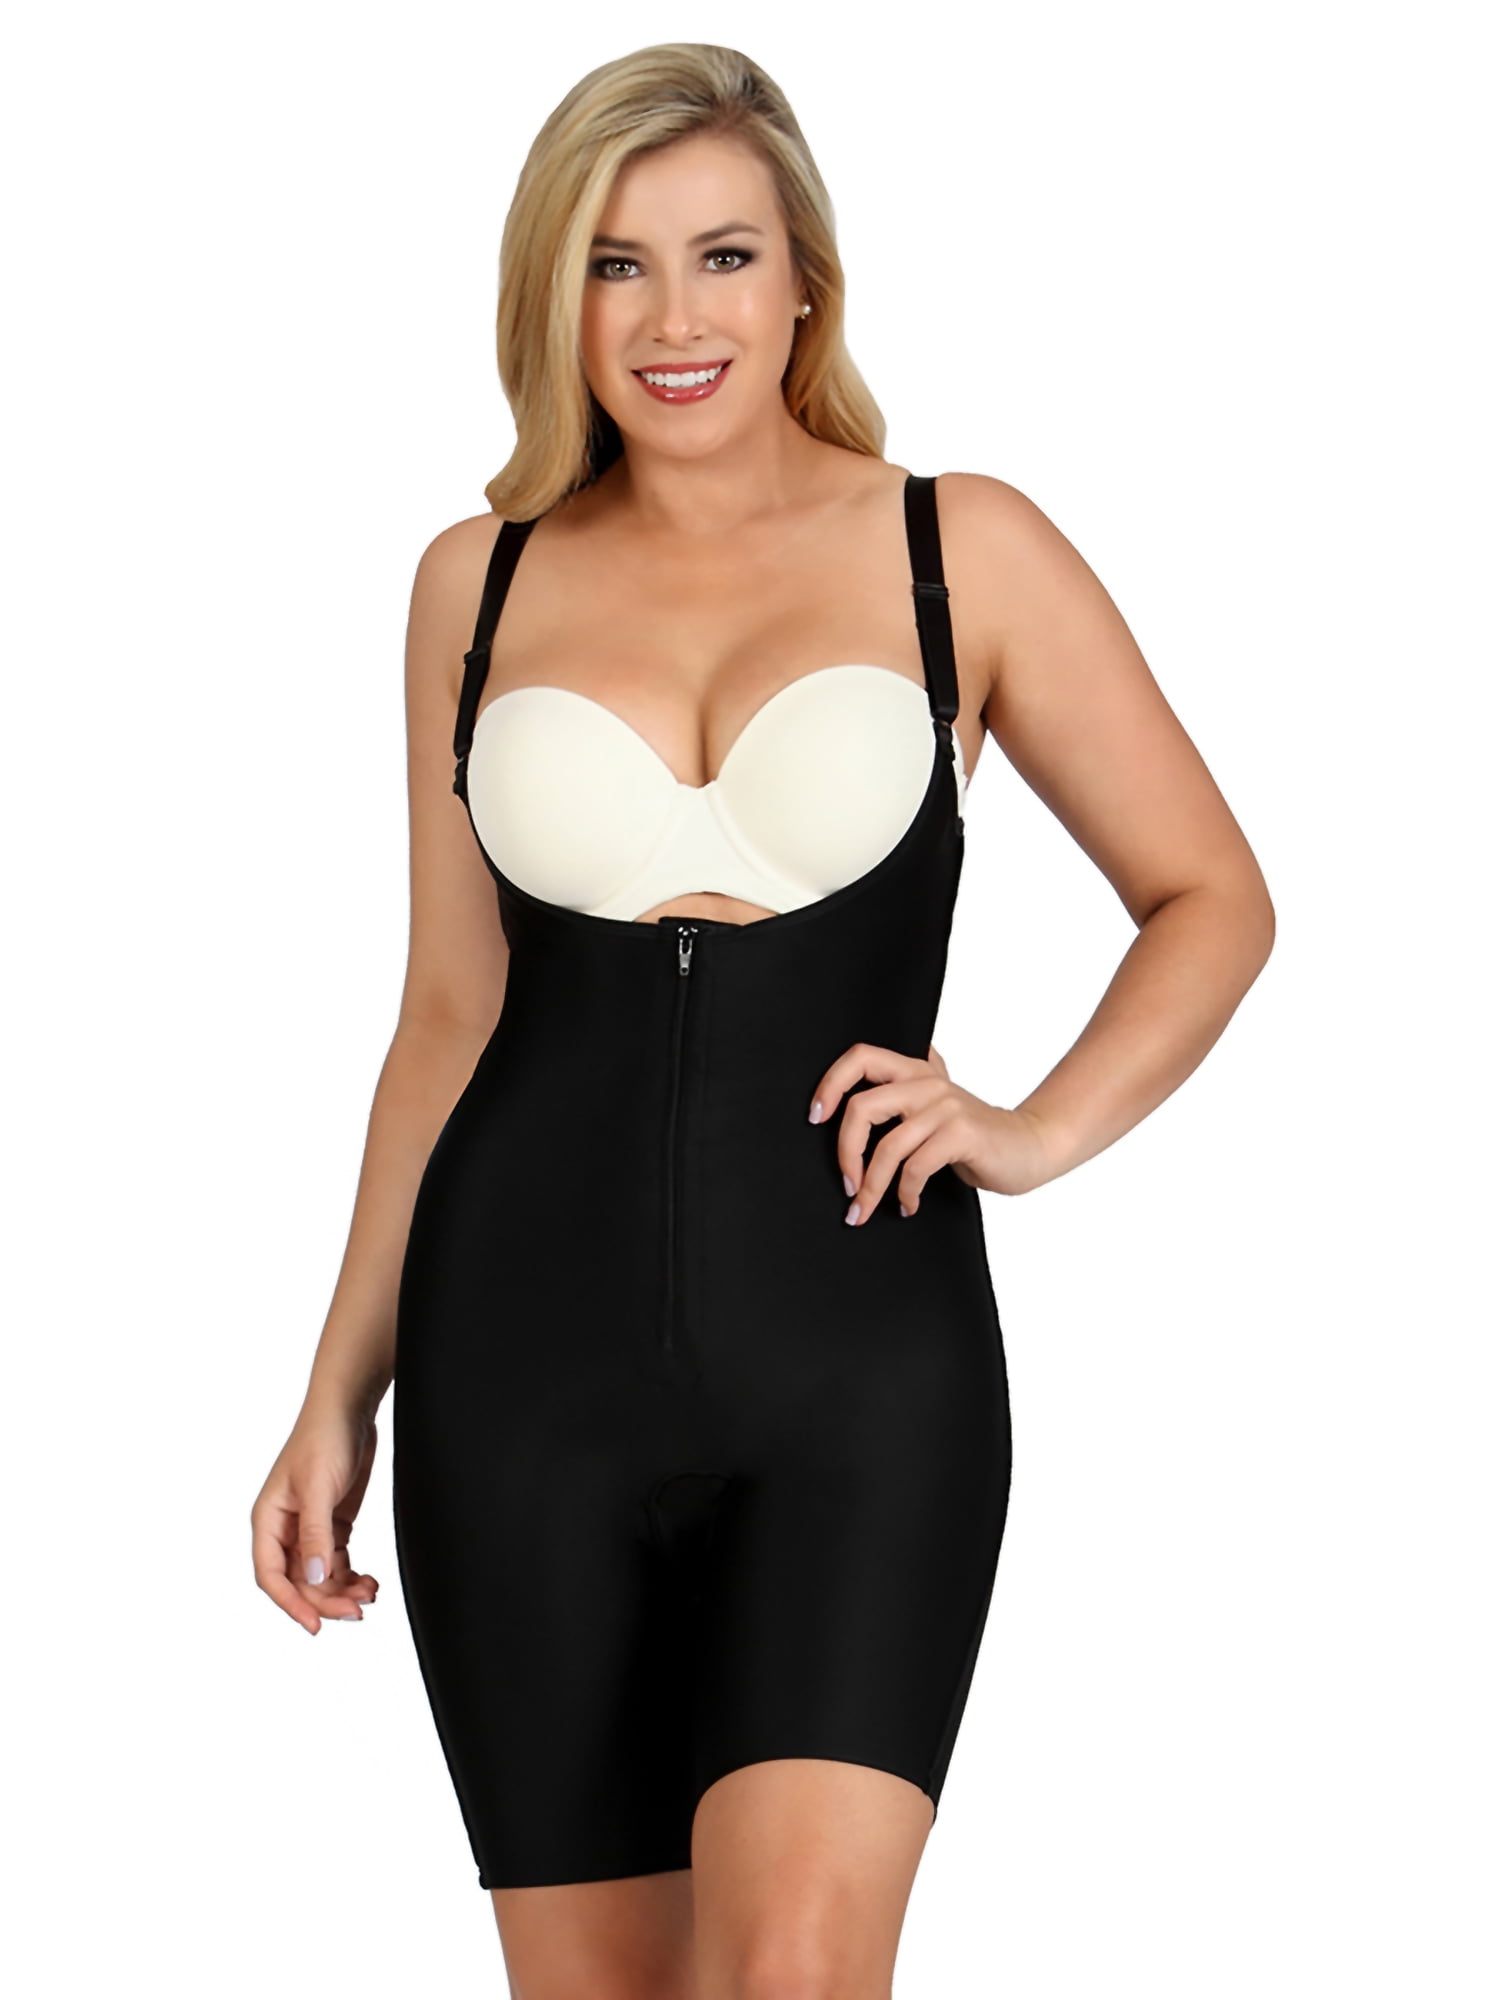 InstantFigure Women’s Firm Compression Underbust Shaping and Slimming Cami  Top